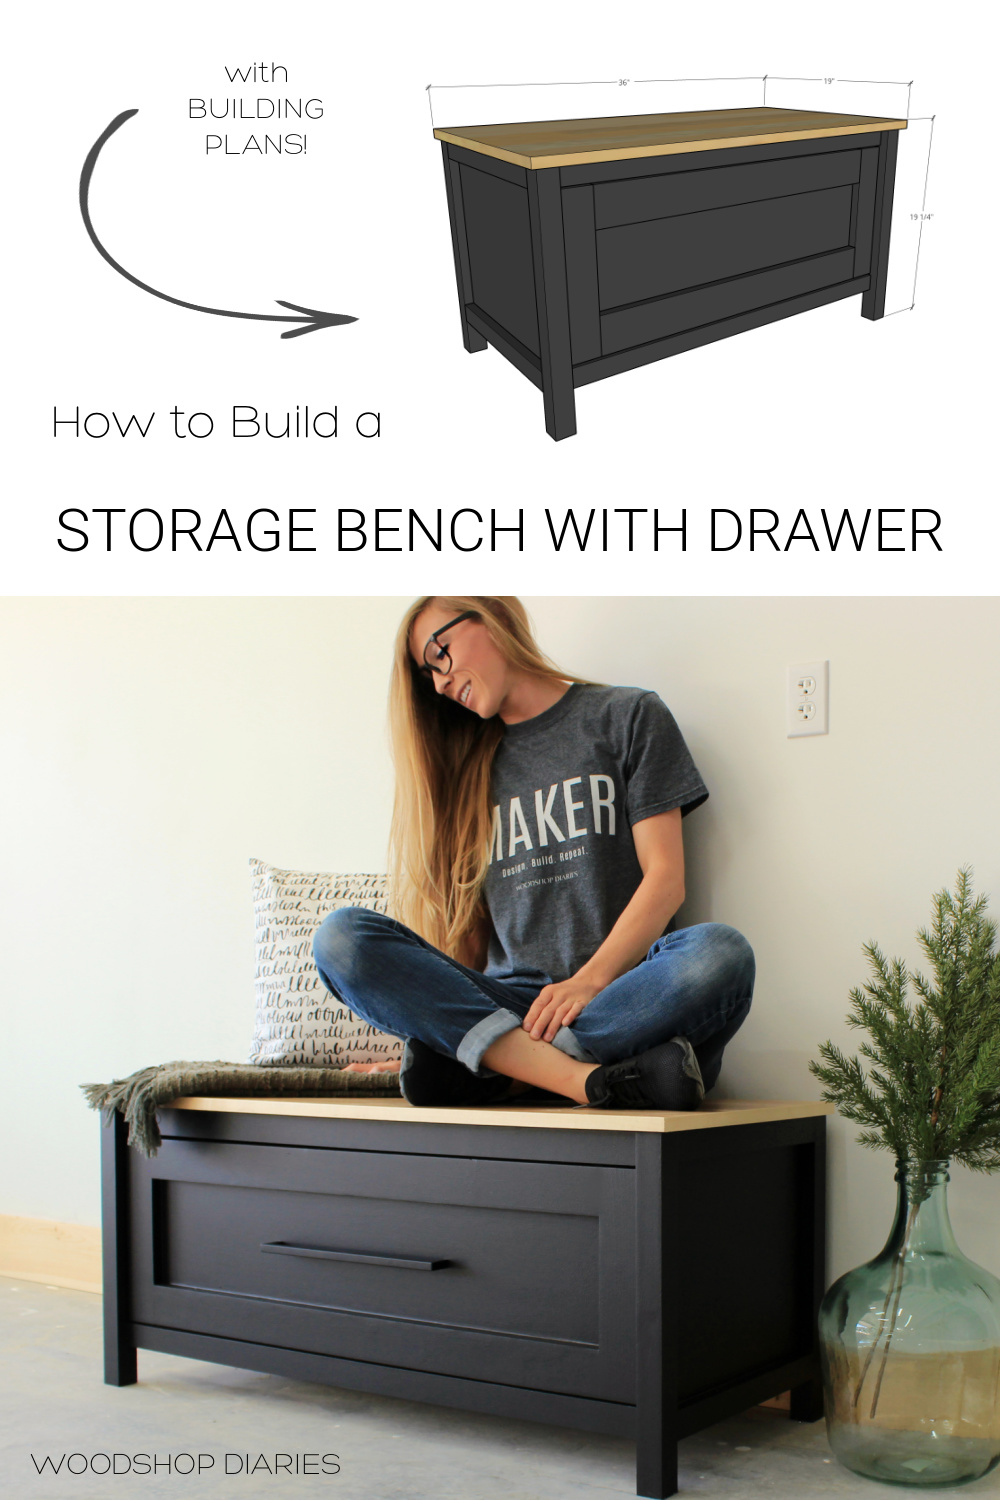 Pinterest collage showing dimensional diagram at top and Shara Woodshop Diaries sitting on bench at bottom with text "how to build a storage bench with drawer"